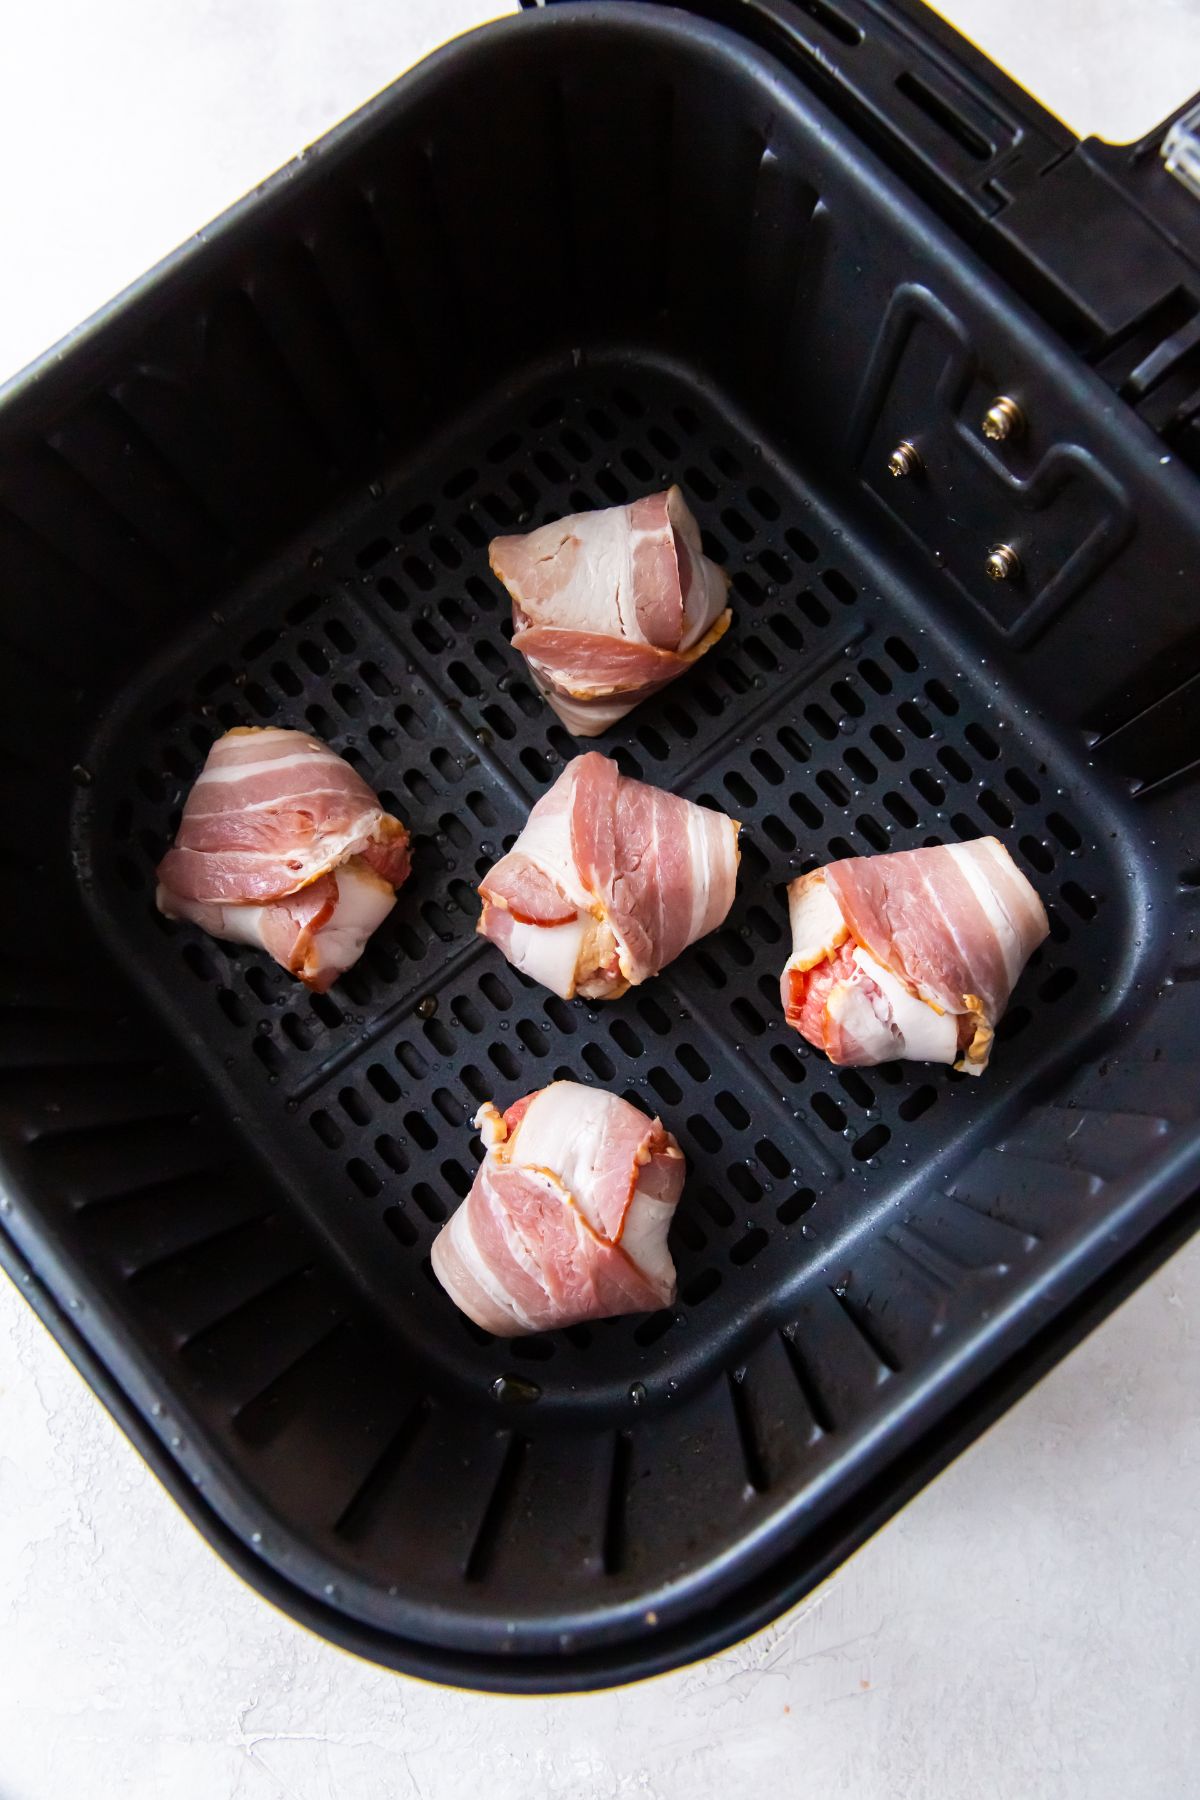 raw meatballs with bacon wrapped around them in the air fryer